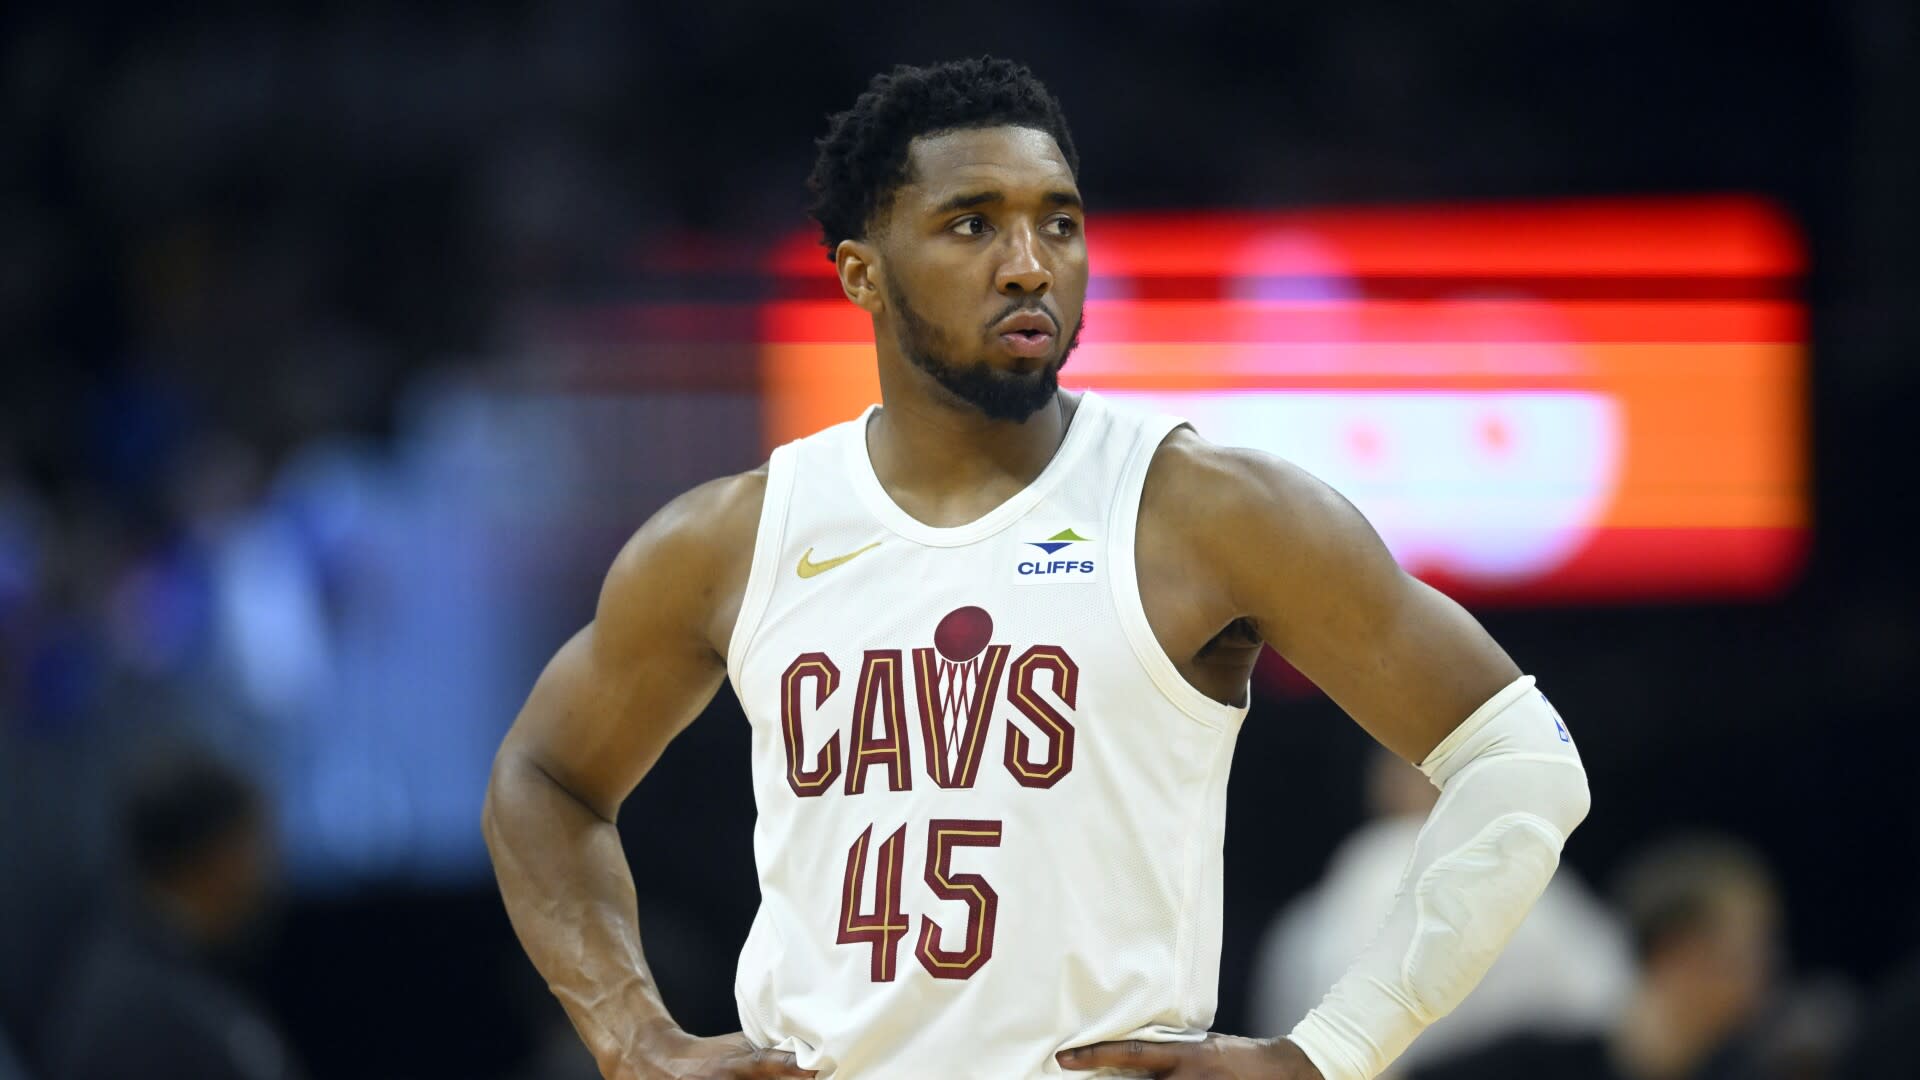 Donovan Mitchell: 'I am happy in Cleveland.' But will he sign extension?